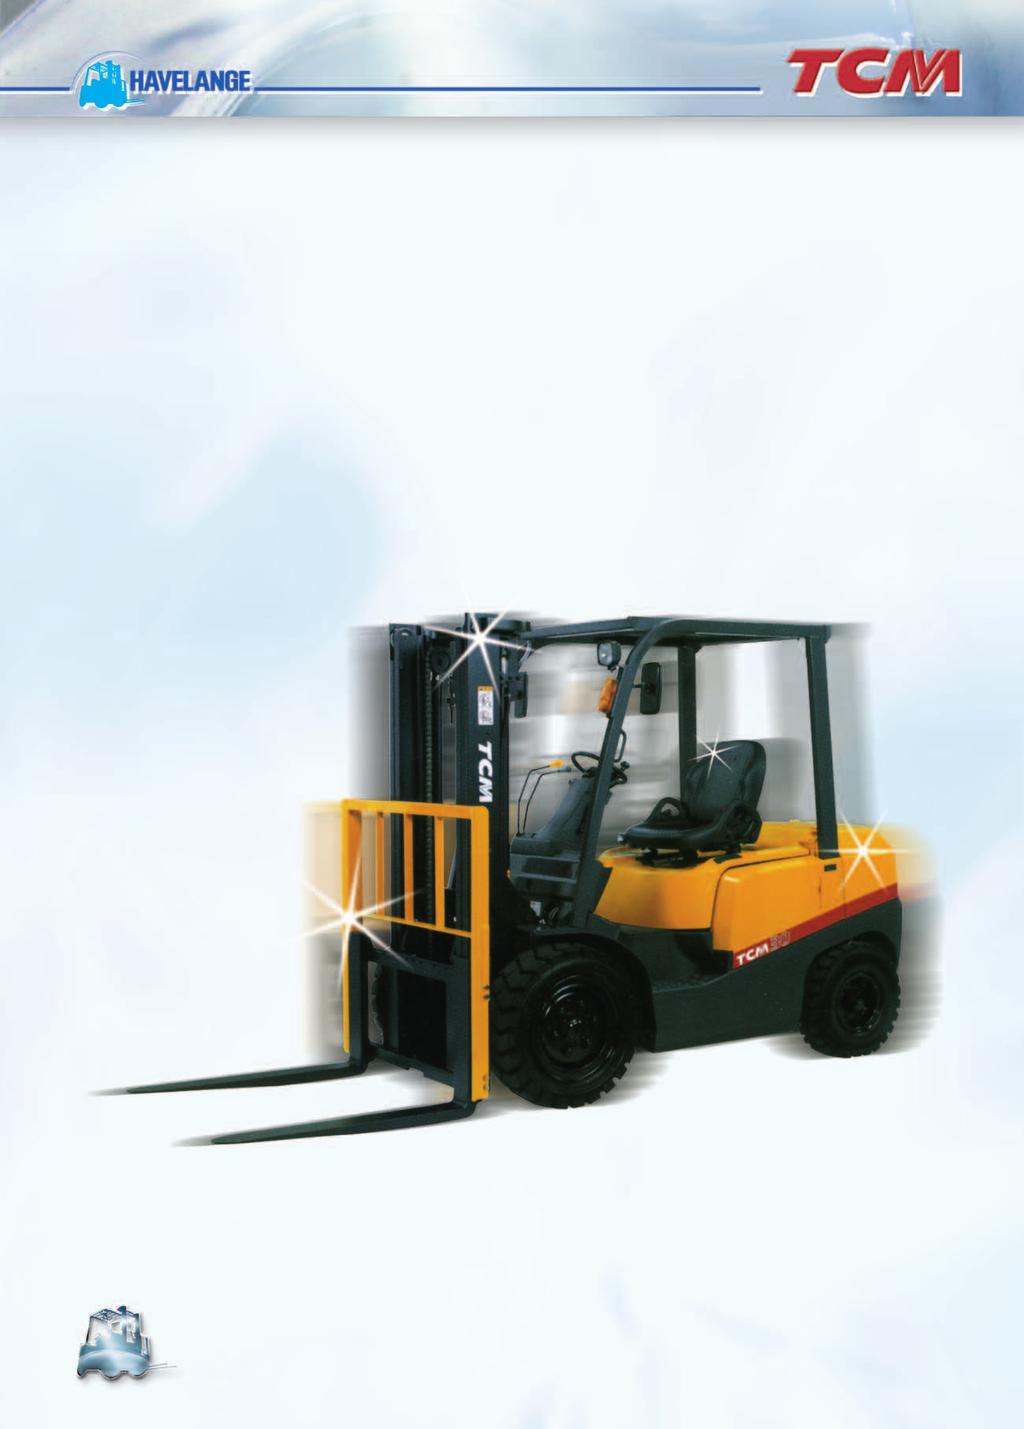 I.C. ENGINE POWERED FORKLIFT TRUCK Counter-Balance Type 1,5-3,5 ton Havelange lifts, driven by service FG15C13 / FG15T13 / FHG15C3 / FHG15T3 FD15C13 / FD15T13 / FHD15C3 / FHD15T3 / FHD15C3Z /